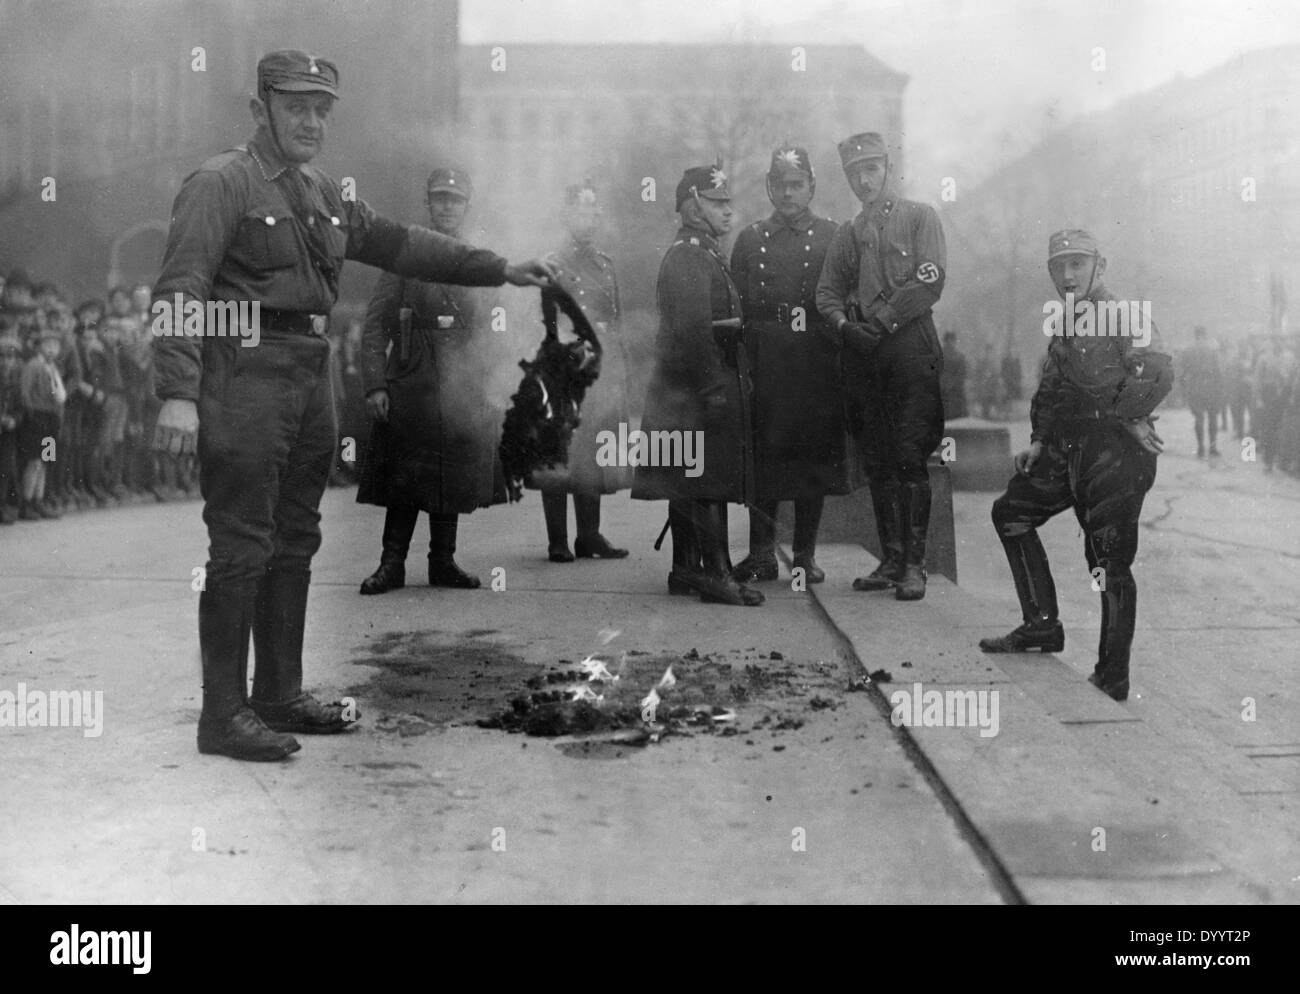 Burning of the the German flag by National socialists, 1933 Stock Photo